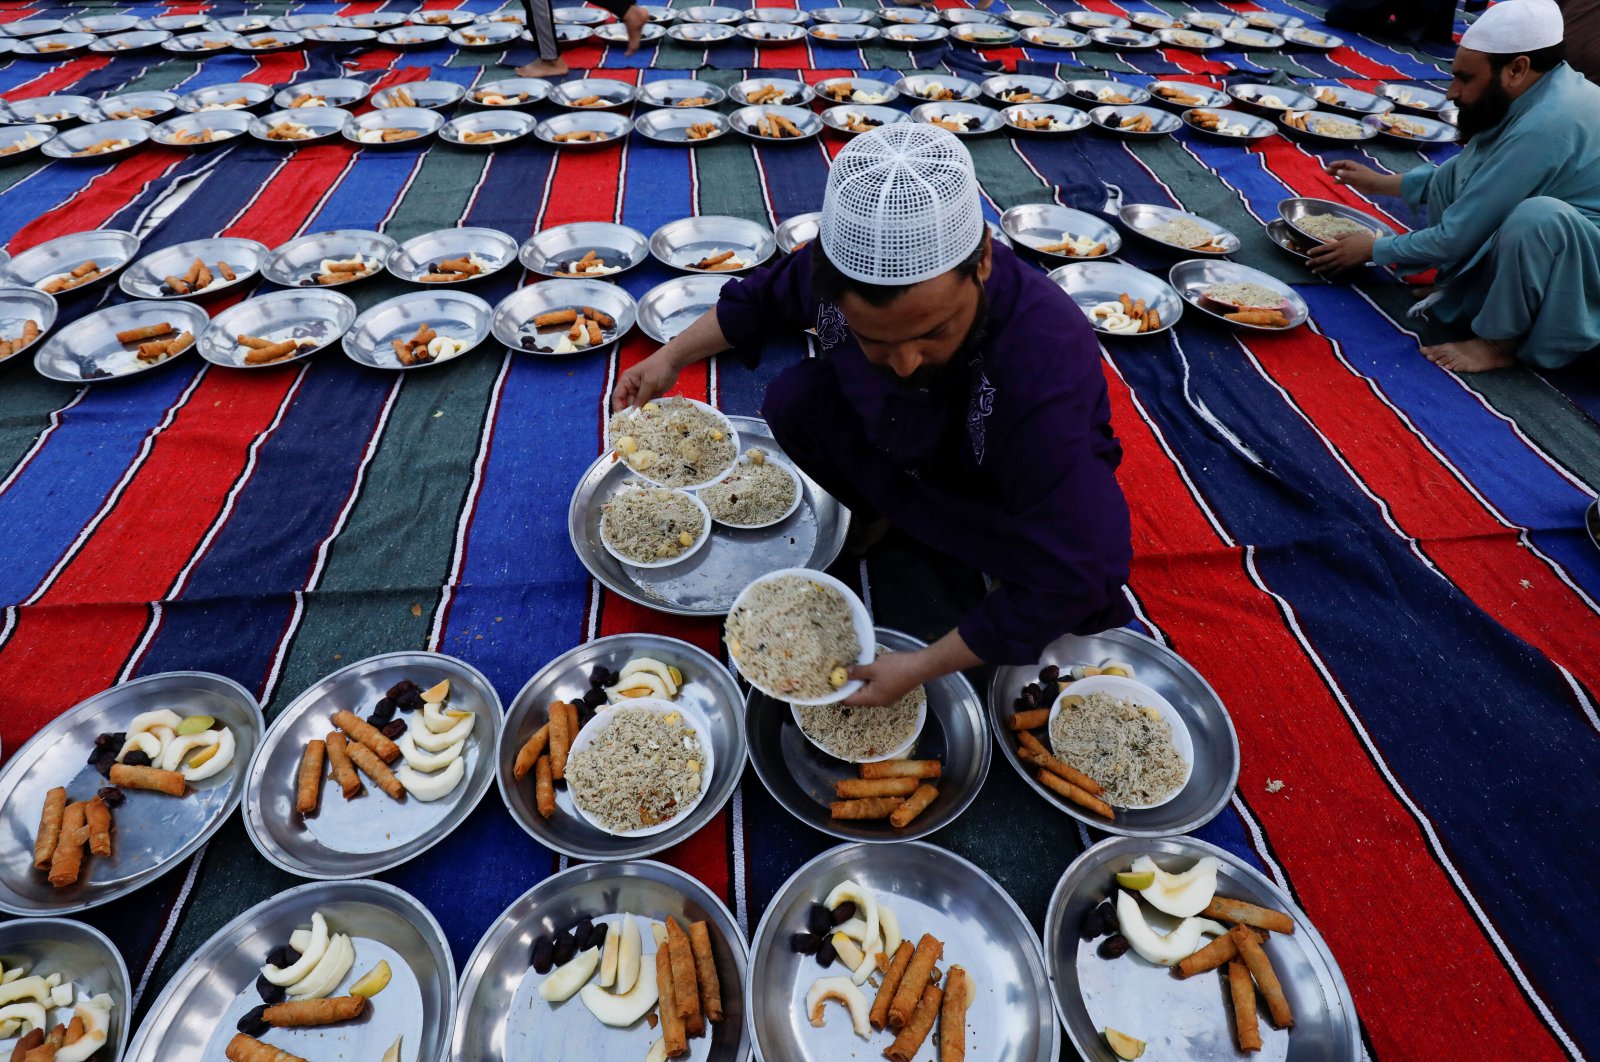 A man arranges plates of food for iftar during the fasting month of Ramadan, as the COVID-19 outbreak continues, at a mosque in Karachi, Pakistan, April 14, 2021. (Reuters Photo)